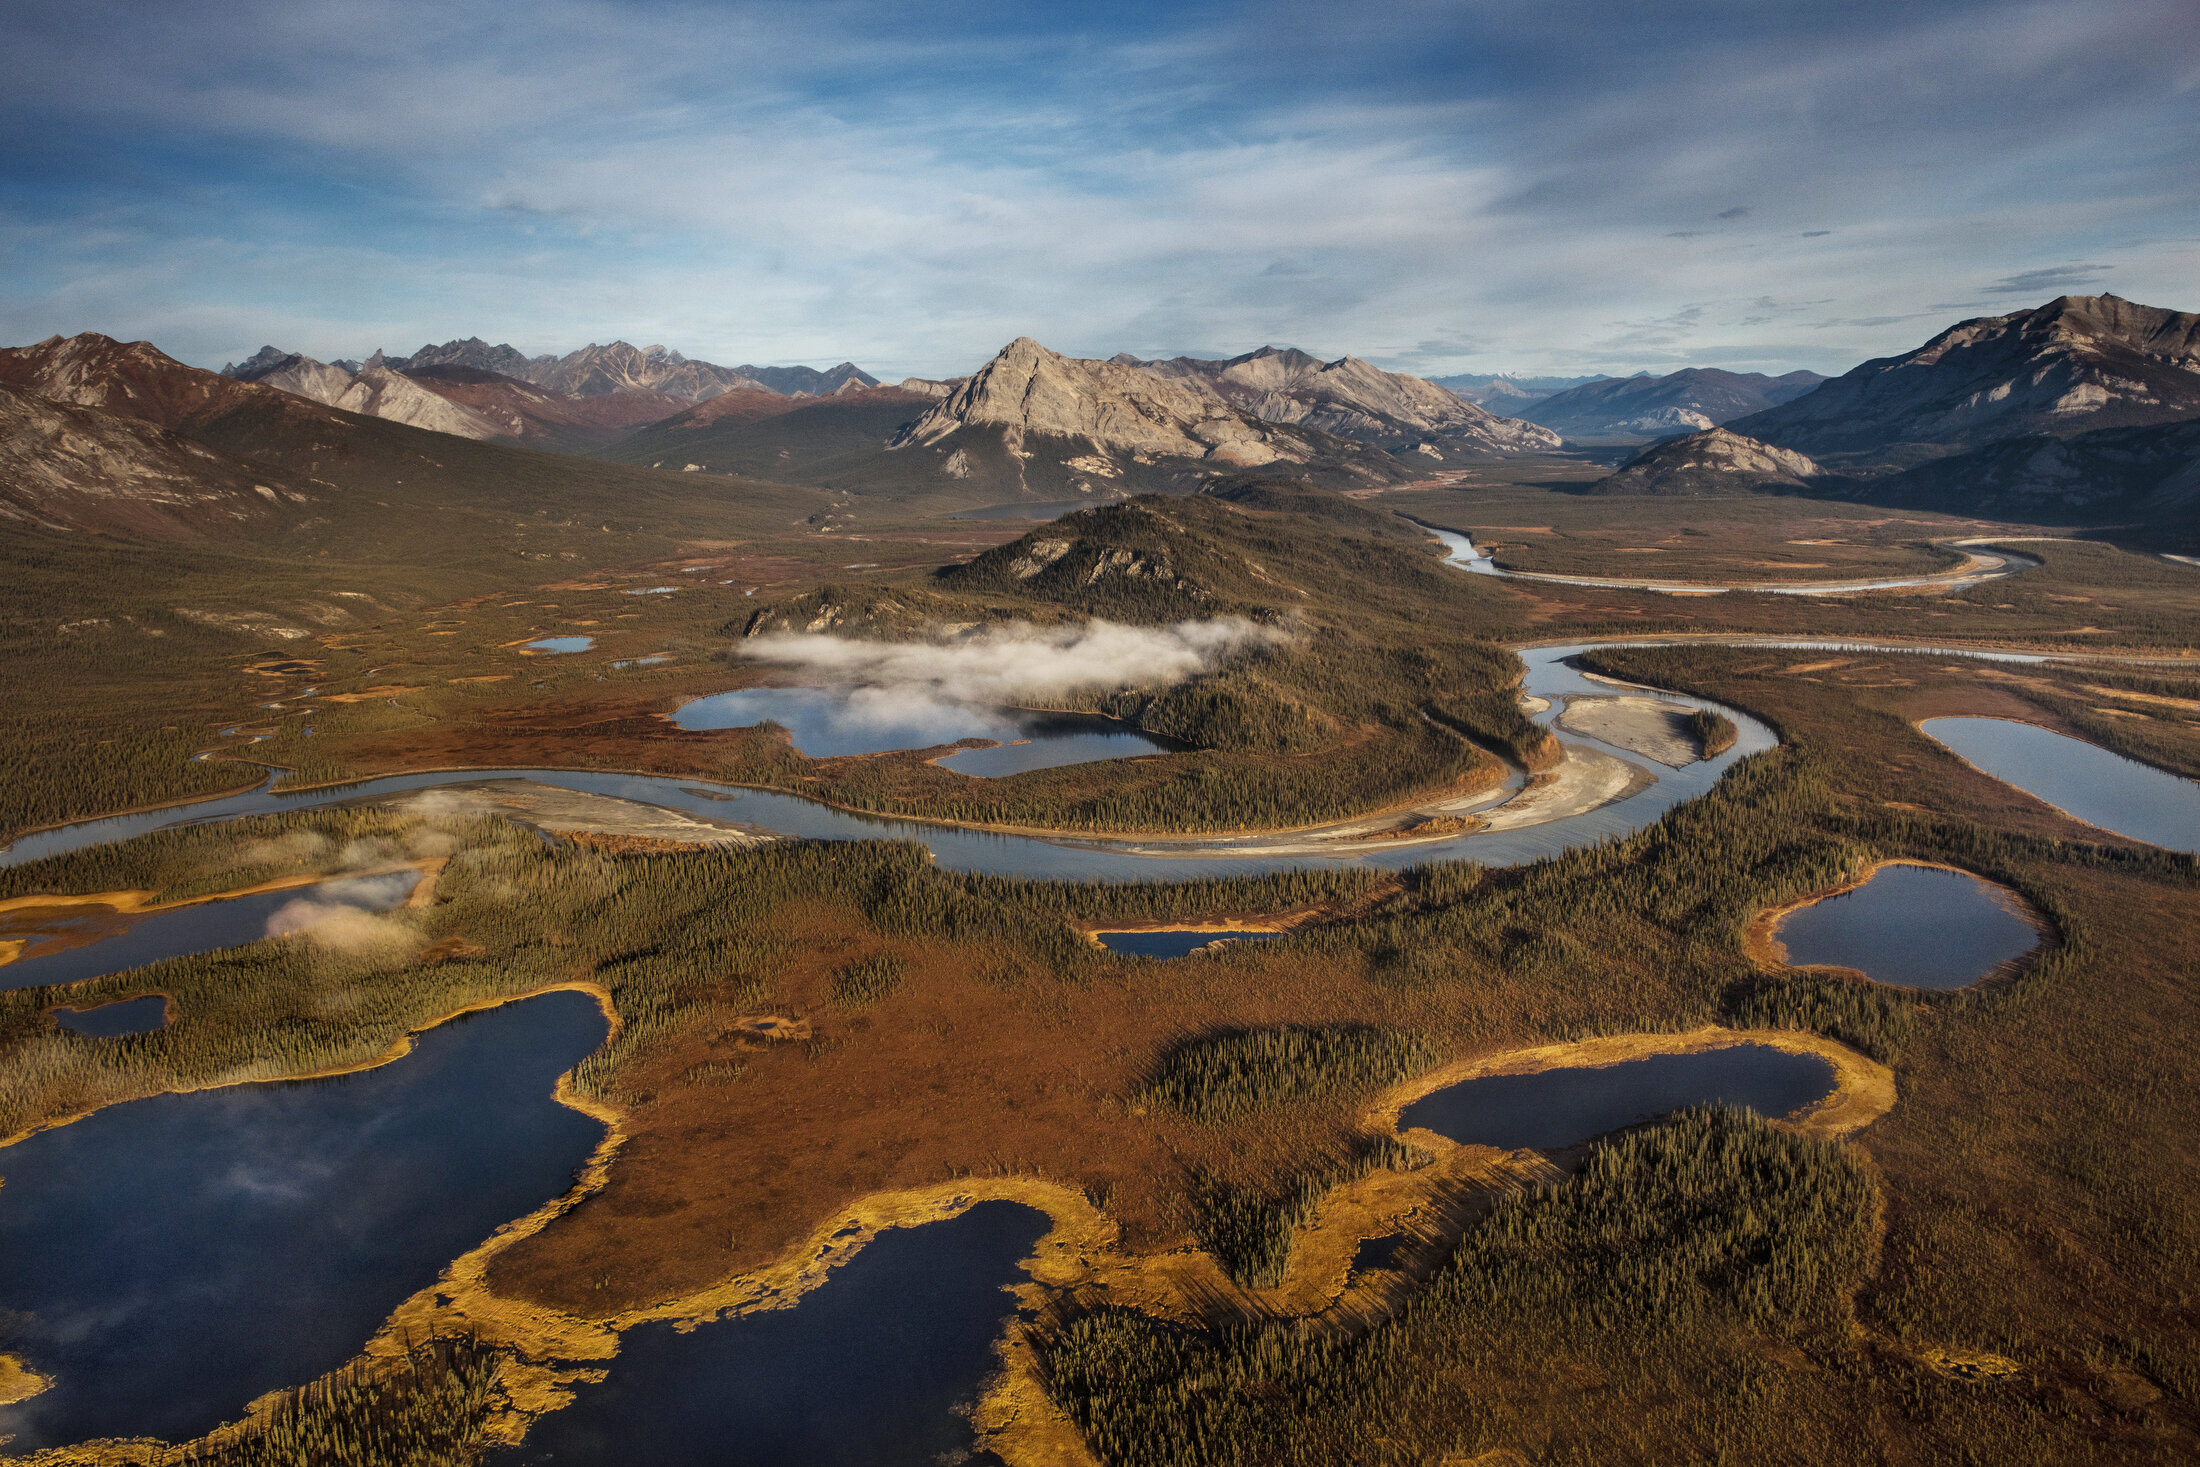  Flying over the head water of  the Alatna River in Gates of the Arctic national Park on an expedition that followed ecologist Ken Tape, guide Michael Wald and National Geographic writer Craig Welch as they look at the ecological impact of beavers in